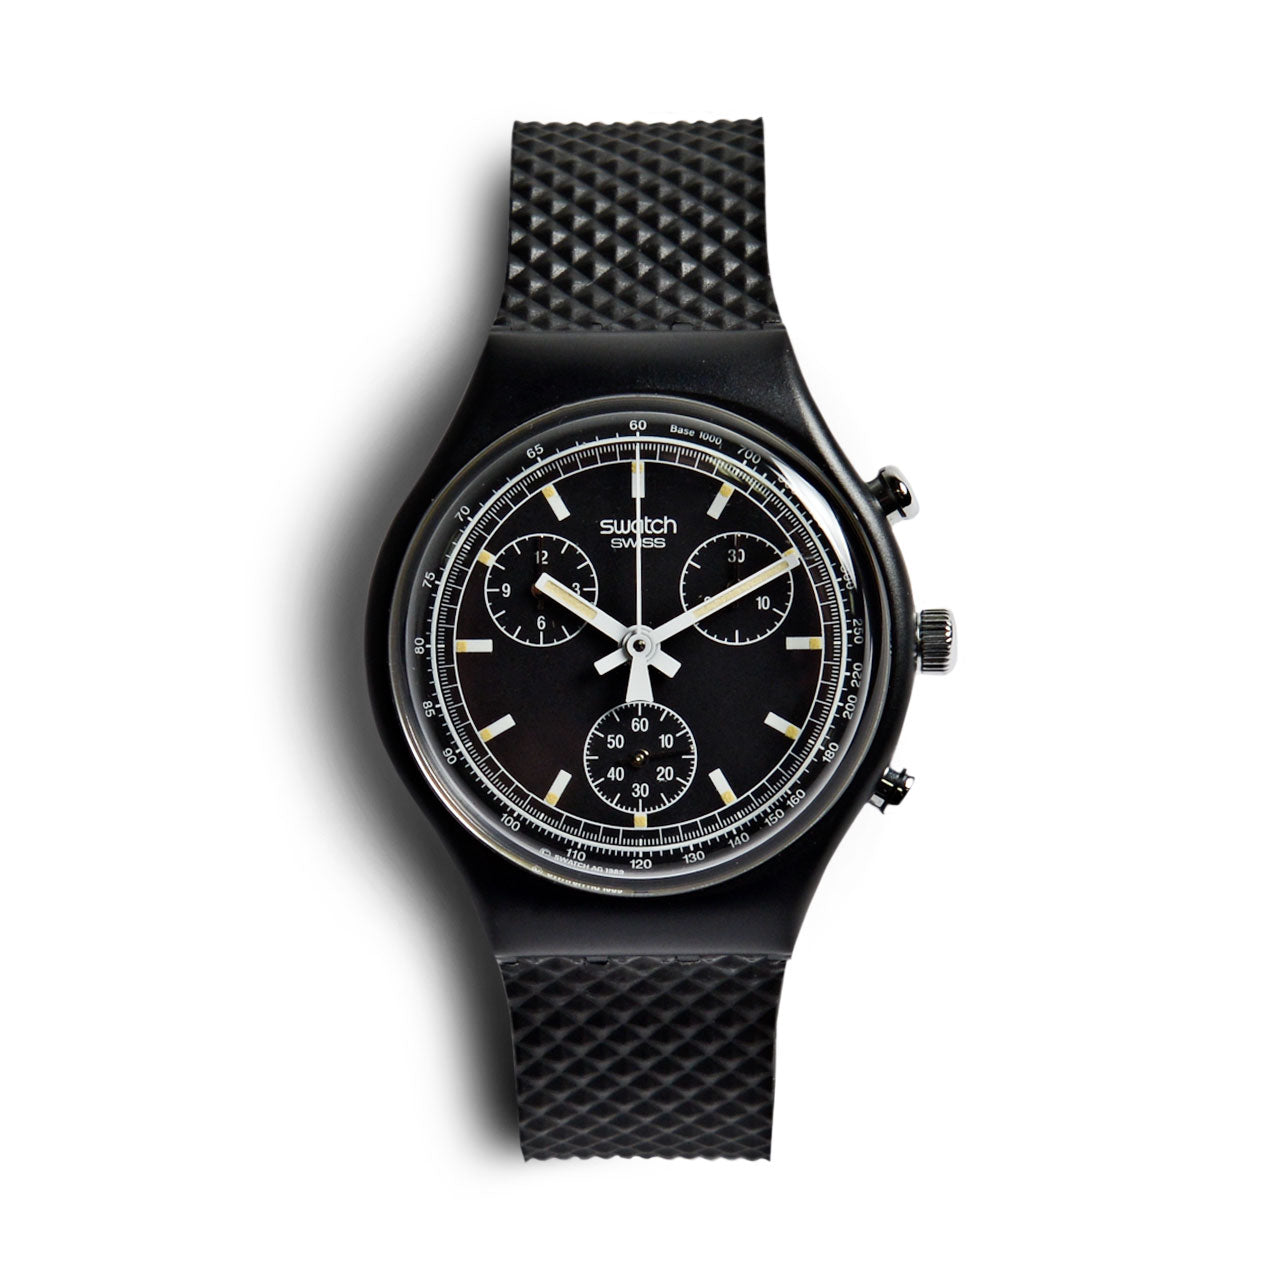 Swatch SCB100 Black Friday Chronograph Watch Uncrate